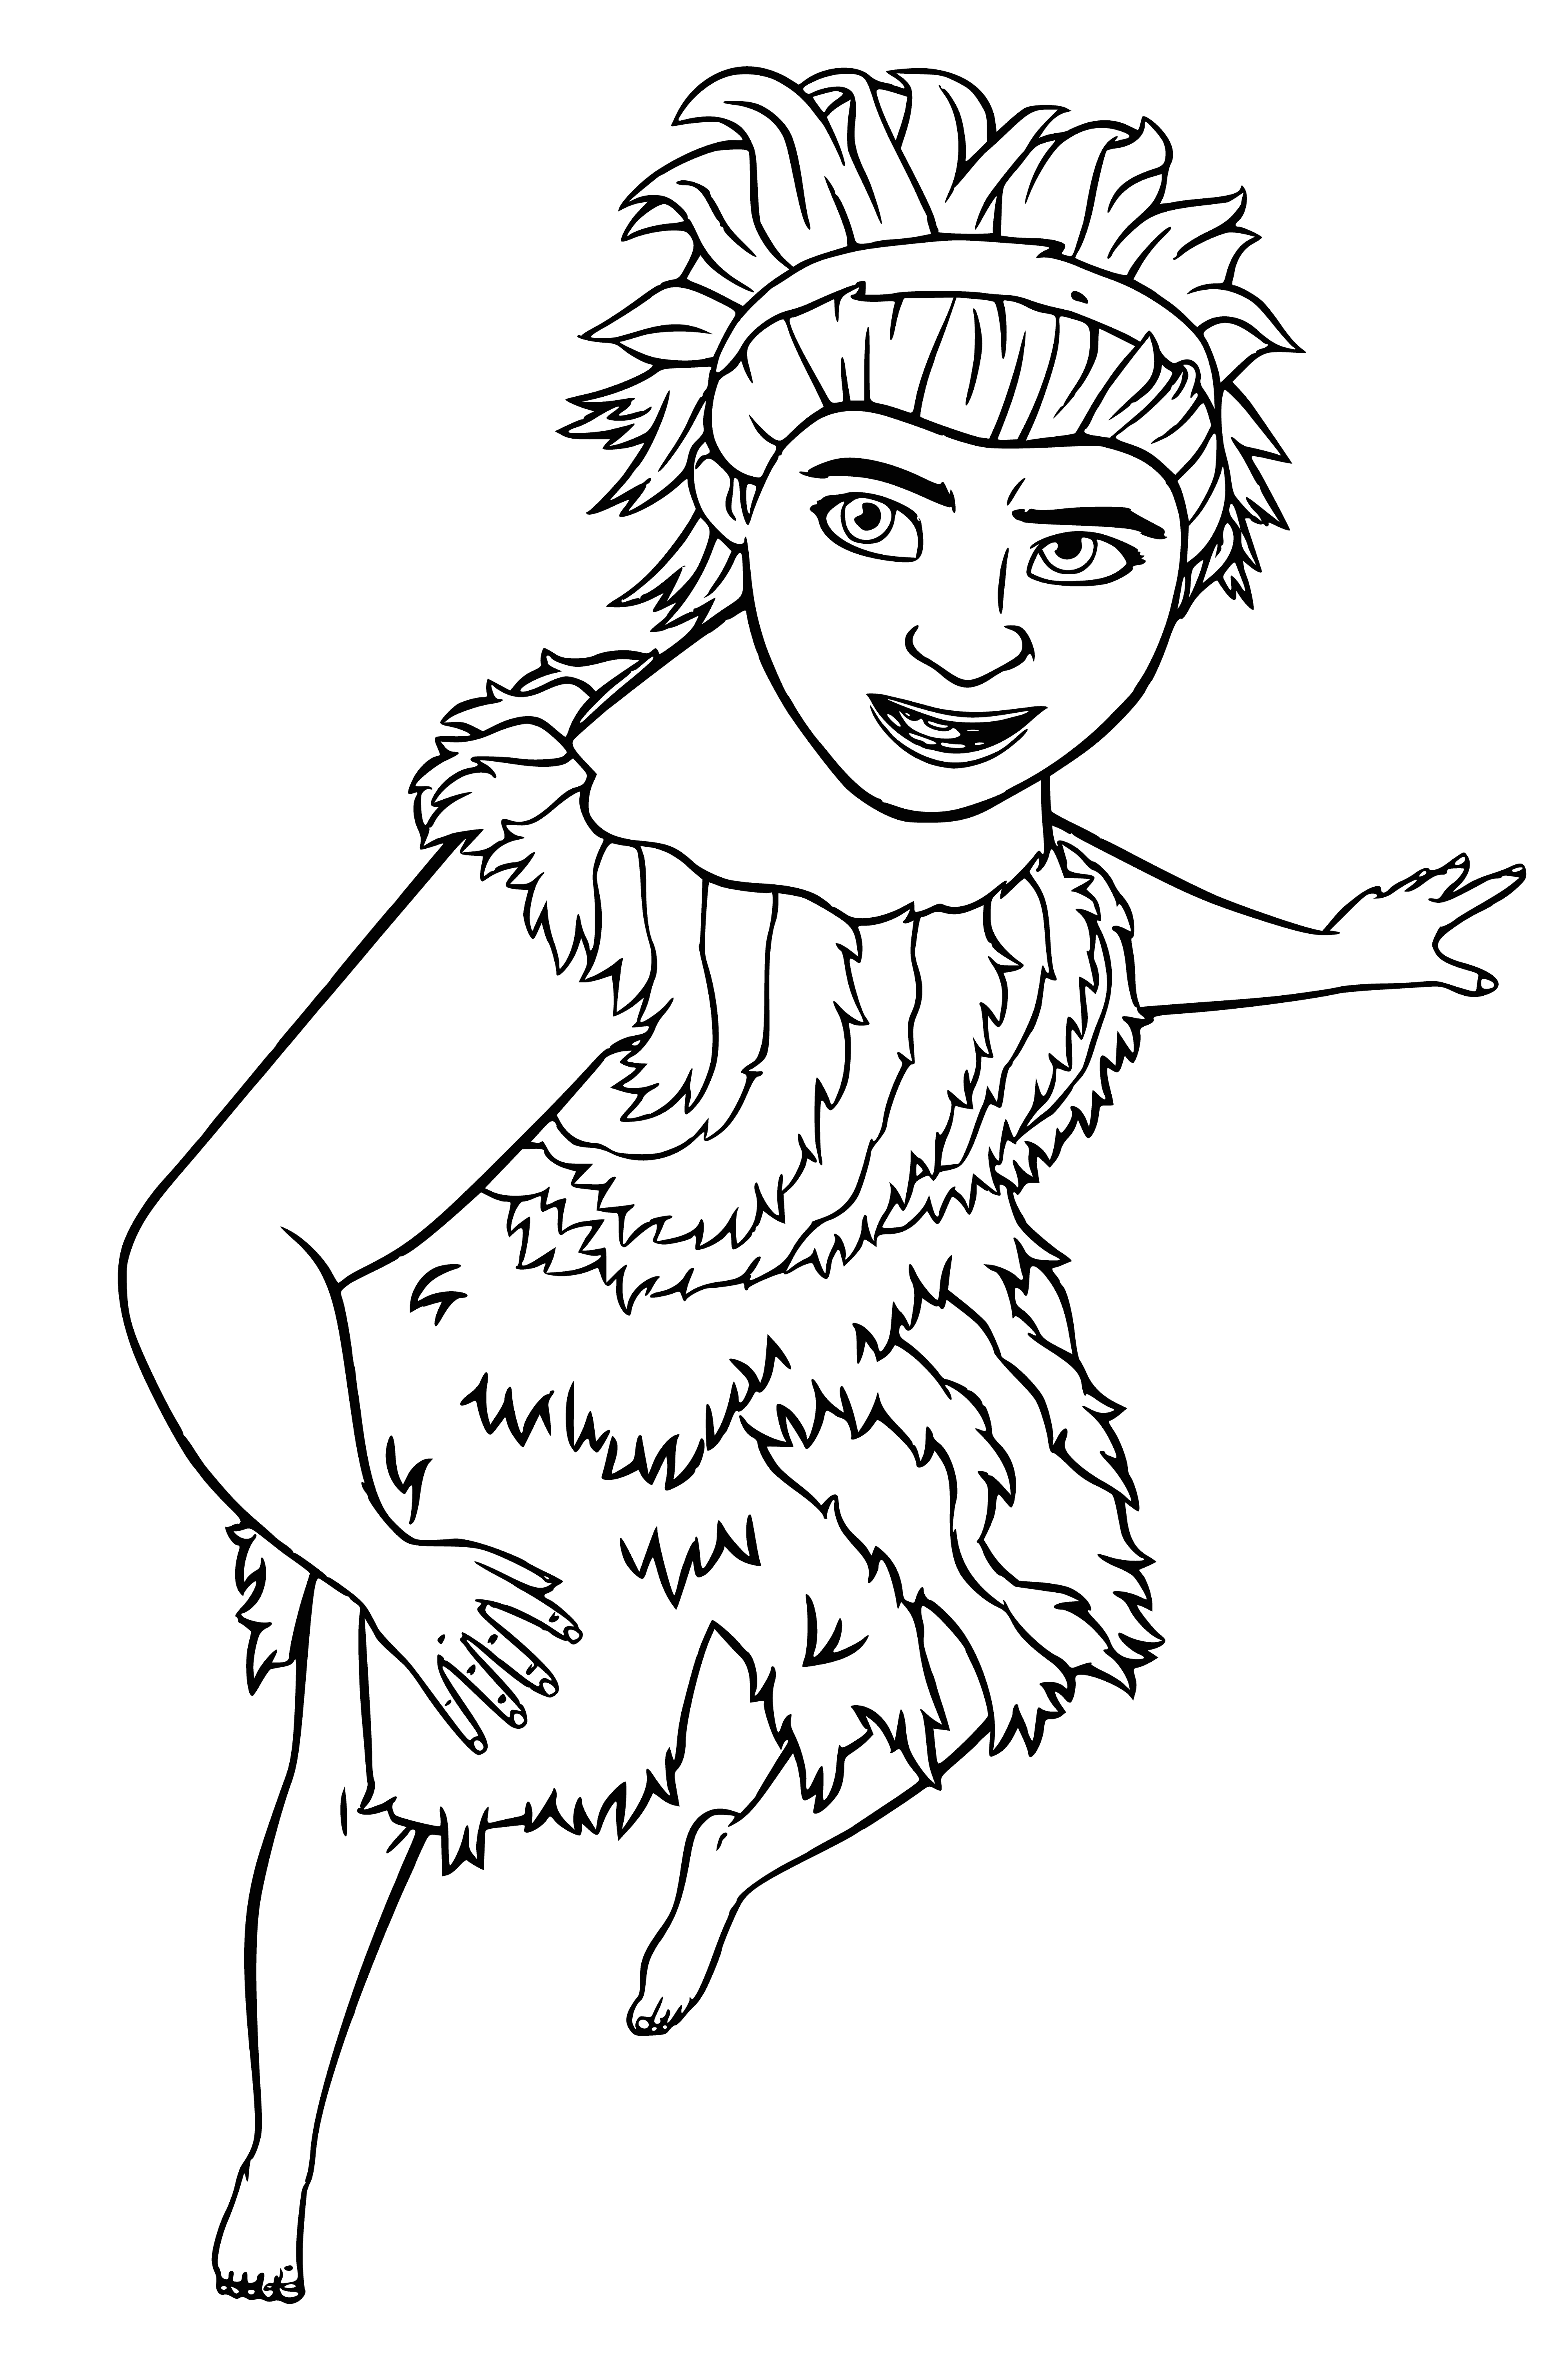 coloring page: Girl in white dress stands in blue sky with clouds. Wears brown belt, pendant & shoes. #coloringpage